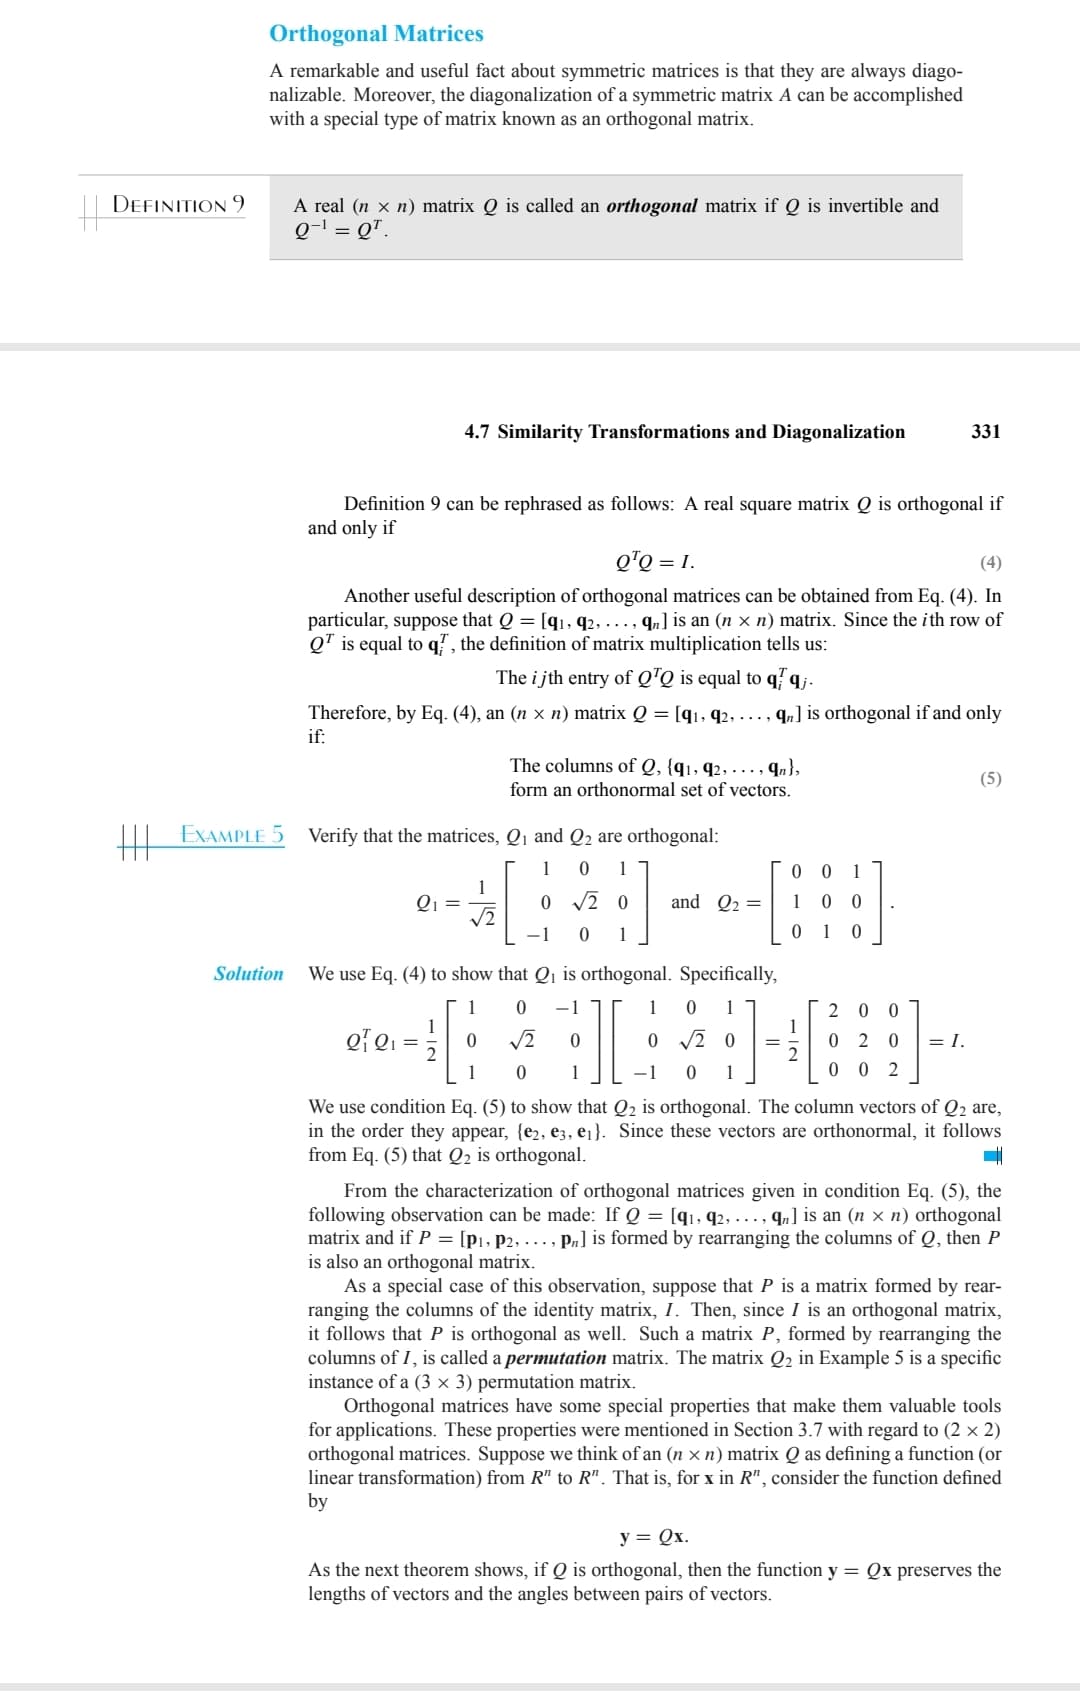 DEFINITION 9
Orthogonal Matrices
A remarkable and useful fact about symmetric matrices is that they are always diago-
nalizable. Moreover, the diagonalization of a symmetric matrix A can be accomplished
with a special type of matrix known as an orthogonal matrix.
EXAMPLE 5
Solution
A real (n x n) matrix Q is called an orthogonal matrix if Q is invertible and
Q-¹ = QT.
4.7 Similarity Transformations and Diagonalization
Definition 9 can be rephrased as follows: A real square matrix Q is orthogonal if
and only if
Q¹Q = 1.
(4)
Another useful description of orthogonal matrices can be obtained from Eq. (4). In
particular, suppose that Q = [91, 92, ..., qn] is an (n × n) matrix. Since the ith row of
Q¹ is equal to q, the definition of matrix multiplication tells us:
The ijth entry of QTQ is equal to qq.
Therefore, by Eq. (4), an (n × n) matrix Q = [9₁, 92, ..., qn] is orthogonal if and only
if:
Q₁ =
Verify that the matrices, Q₁ and Q2 are orthogonal:
1
0 1
0 √20
-1 0 1
1
√√2
The columns of Q, {91, 92,. .., qn},
form an orthonormal set of vectors.
0
1
and Q₂ =
0
1
0 0
10
1
0
=
We use Eq. (4) to show that Q₁ is orthogonal. Specifically,
1 0 -1
1 0 1
of Q₁
Q₁ =
√2
0 √20
0
-1 0 1
We use condition Eq. (5) to show that Q₂ is orthogonal. The column vectors of Q₂ are,
in the order they appear, {e2, e3, e₁}. Since these vectors are orthonormal, it follows
from Eq. (5) that Q2 is orthogonal.
1
0
0
1
2
331
20 0
020
0 0 2
= I.
(5)
From the characterization of orthogonal matrices given in condition Eq. (5), the
following observation can be made: If Q = [q1, 92, … , ¶] is an (n × n) orthogonal
matrix and if P = [P₁, P2, ..., Pn] is formed by rearranging the columns of Q, then P
is also an orthogonal matrix.
As a special case of this observation, suppose that P is a matrix formed by rear-
ranging the columns of the identity matrix, I. Then, since I is an orthogonal matrix,
it follows that P is orthogonal as well. Such a matrix P, formed by rearranging the
columns of I, is called a permutation matrix. The matrix Q₂ in Example 5 is a specific
instance of a (3 x 3) permutation matrix.
Orthogonal matrices have some special properties that make them valuable tools
for applications. These properties were mentioned in Section 3.7 with regard to (2 x 2)
orthogonal matrices. Suppose we think of an (n xn) matrix Q as defining a function (or
linear transformation) from R" to R". That is, for x in R", consider the function defined
by
y = Qx.
As the next theorem shows, if Q is orthogonal, then the function y = Qx preserves the
lengths of vectors and the angles between pairs of vectors.